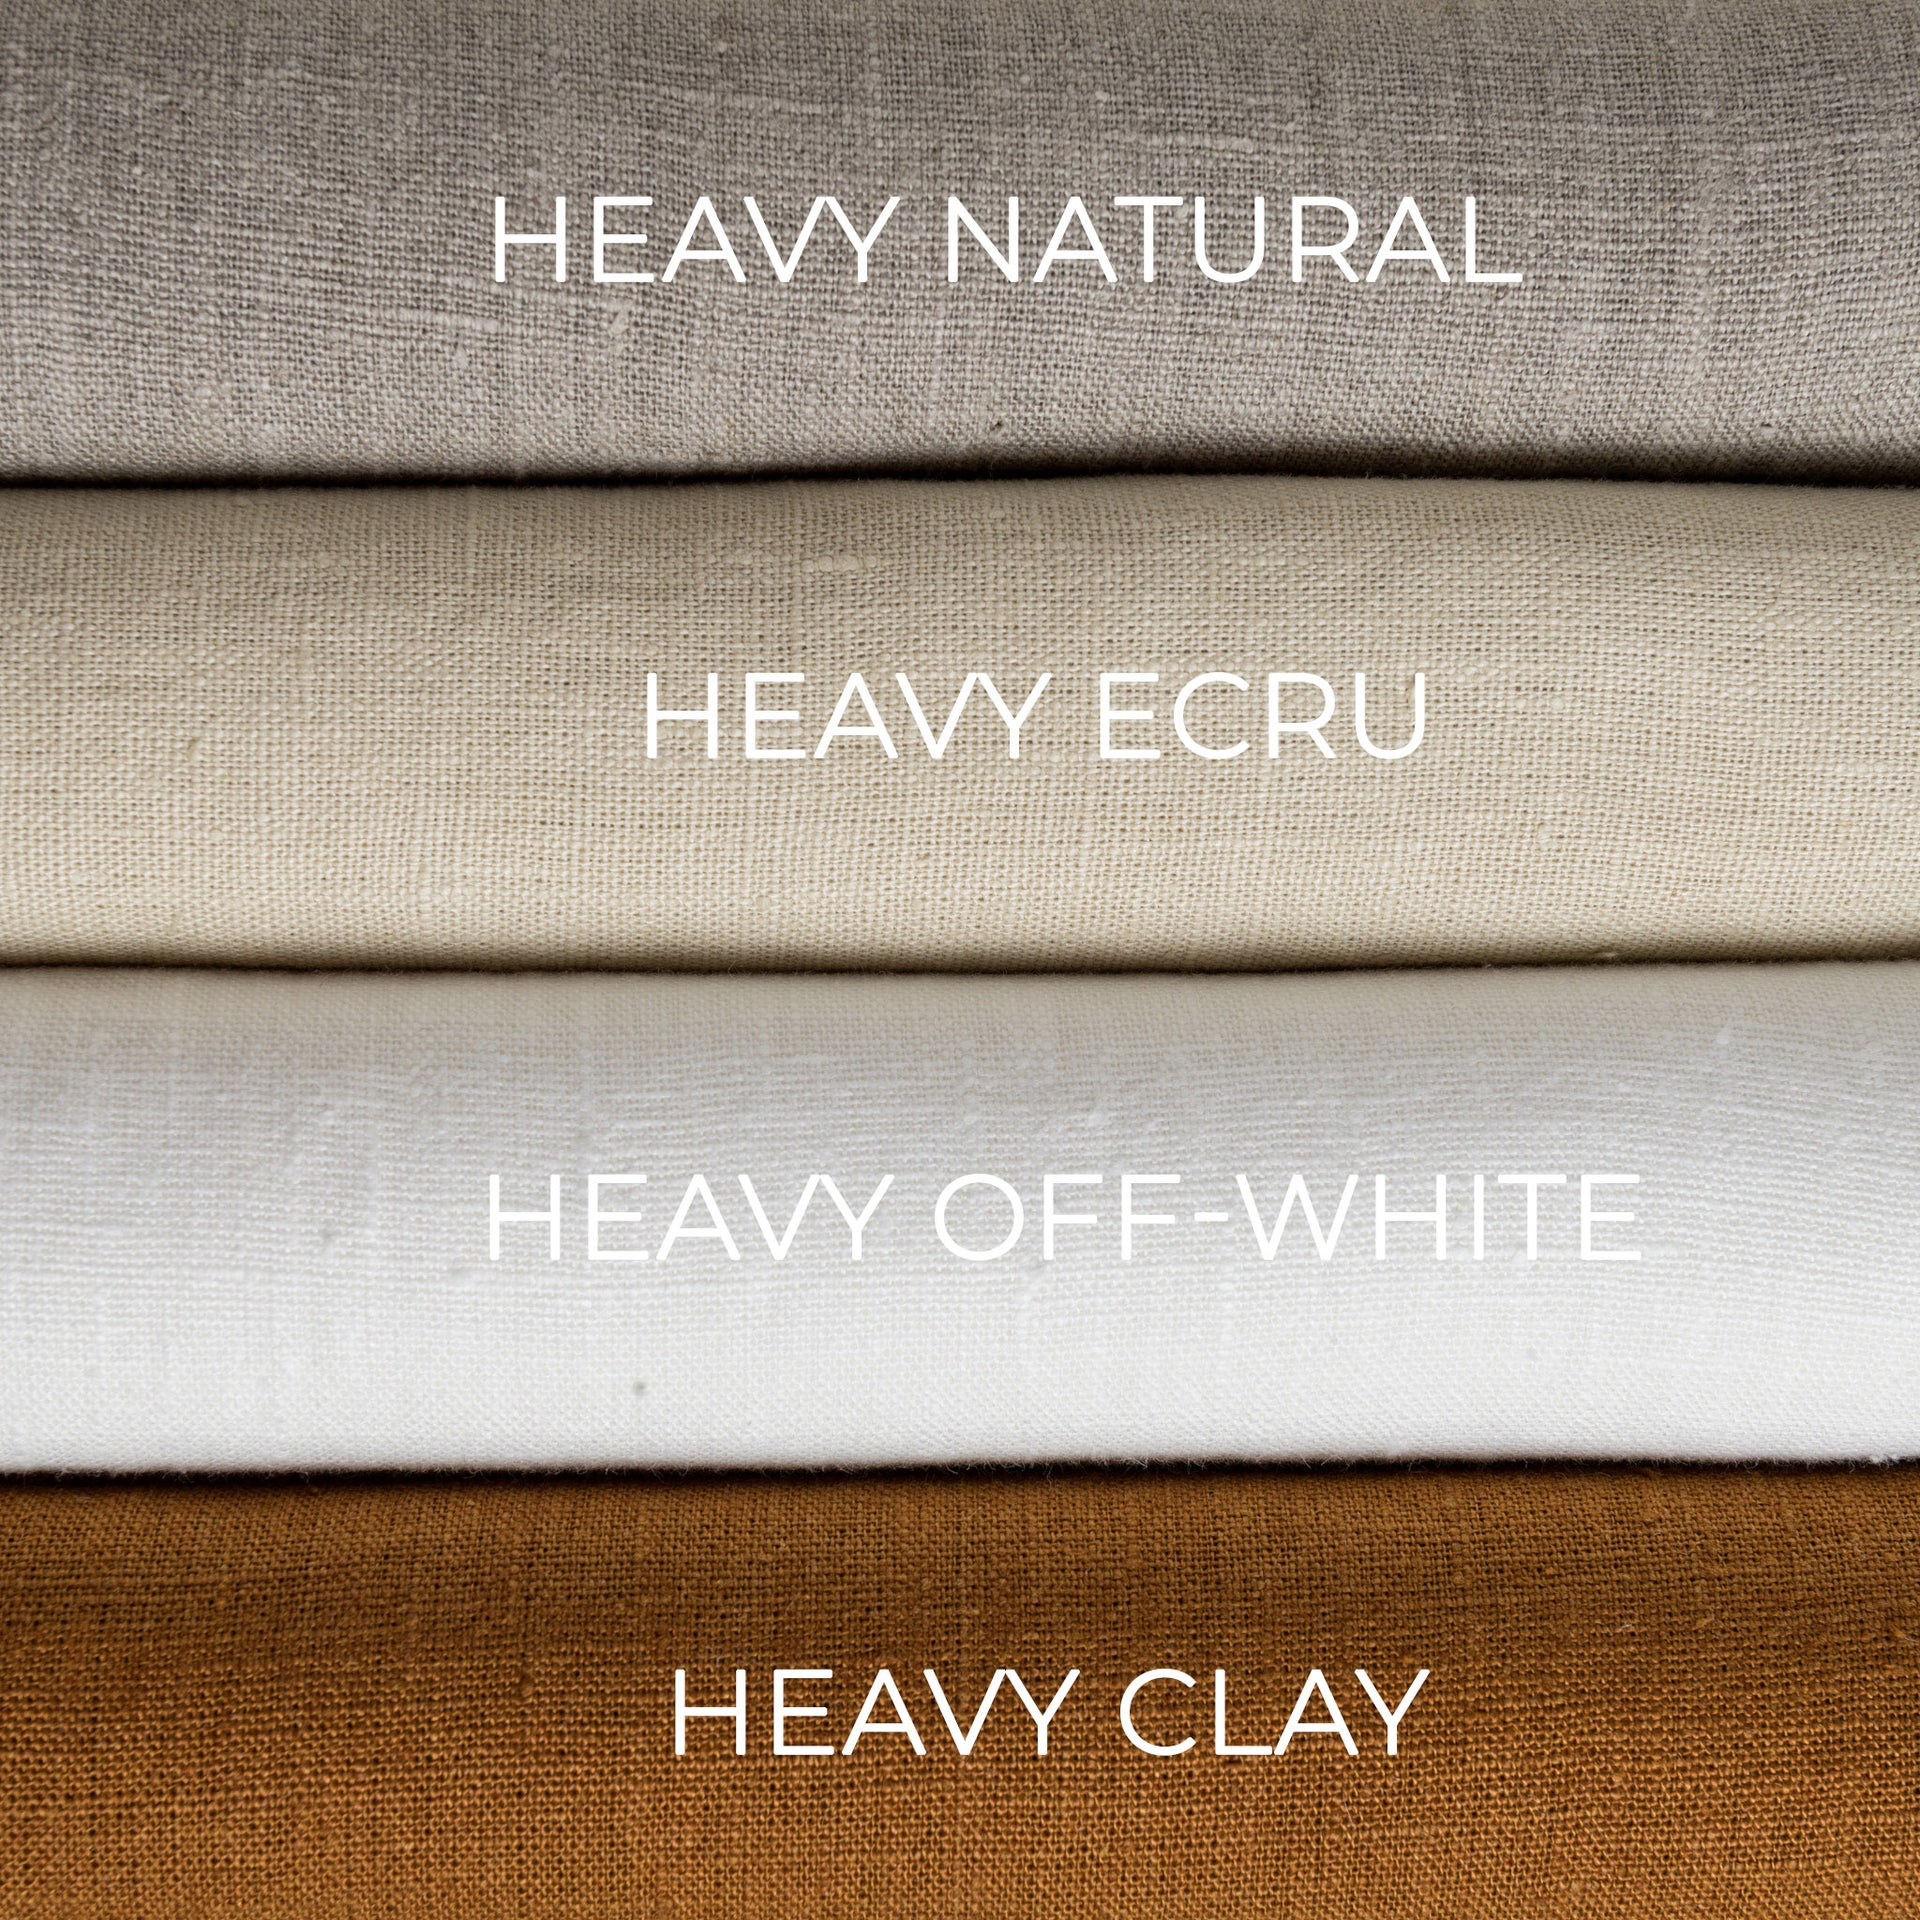 Color: Heavy Weight Natural, Color: Heavy Weight Ecru, Color: Heavy Weight Off-White, Color: Heavy Weight Clay